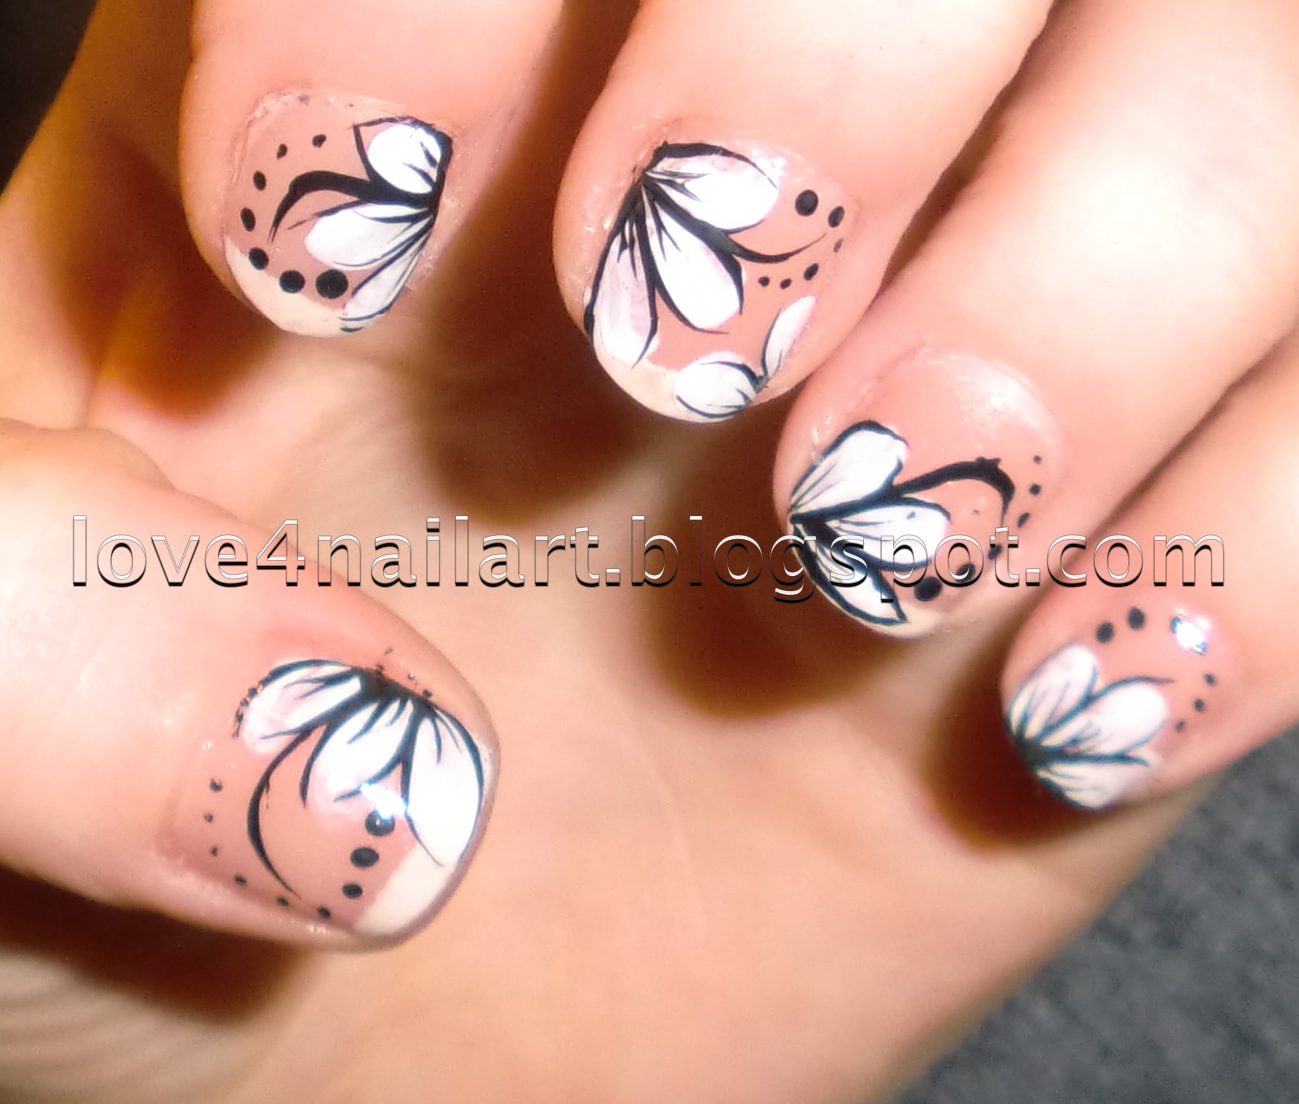 Black and White Nail Design Flowers